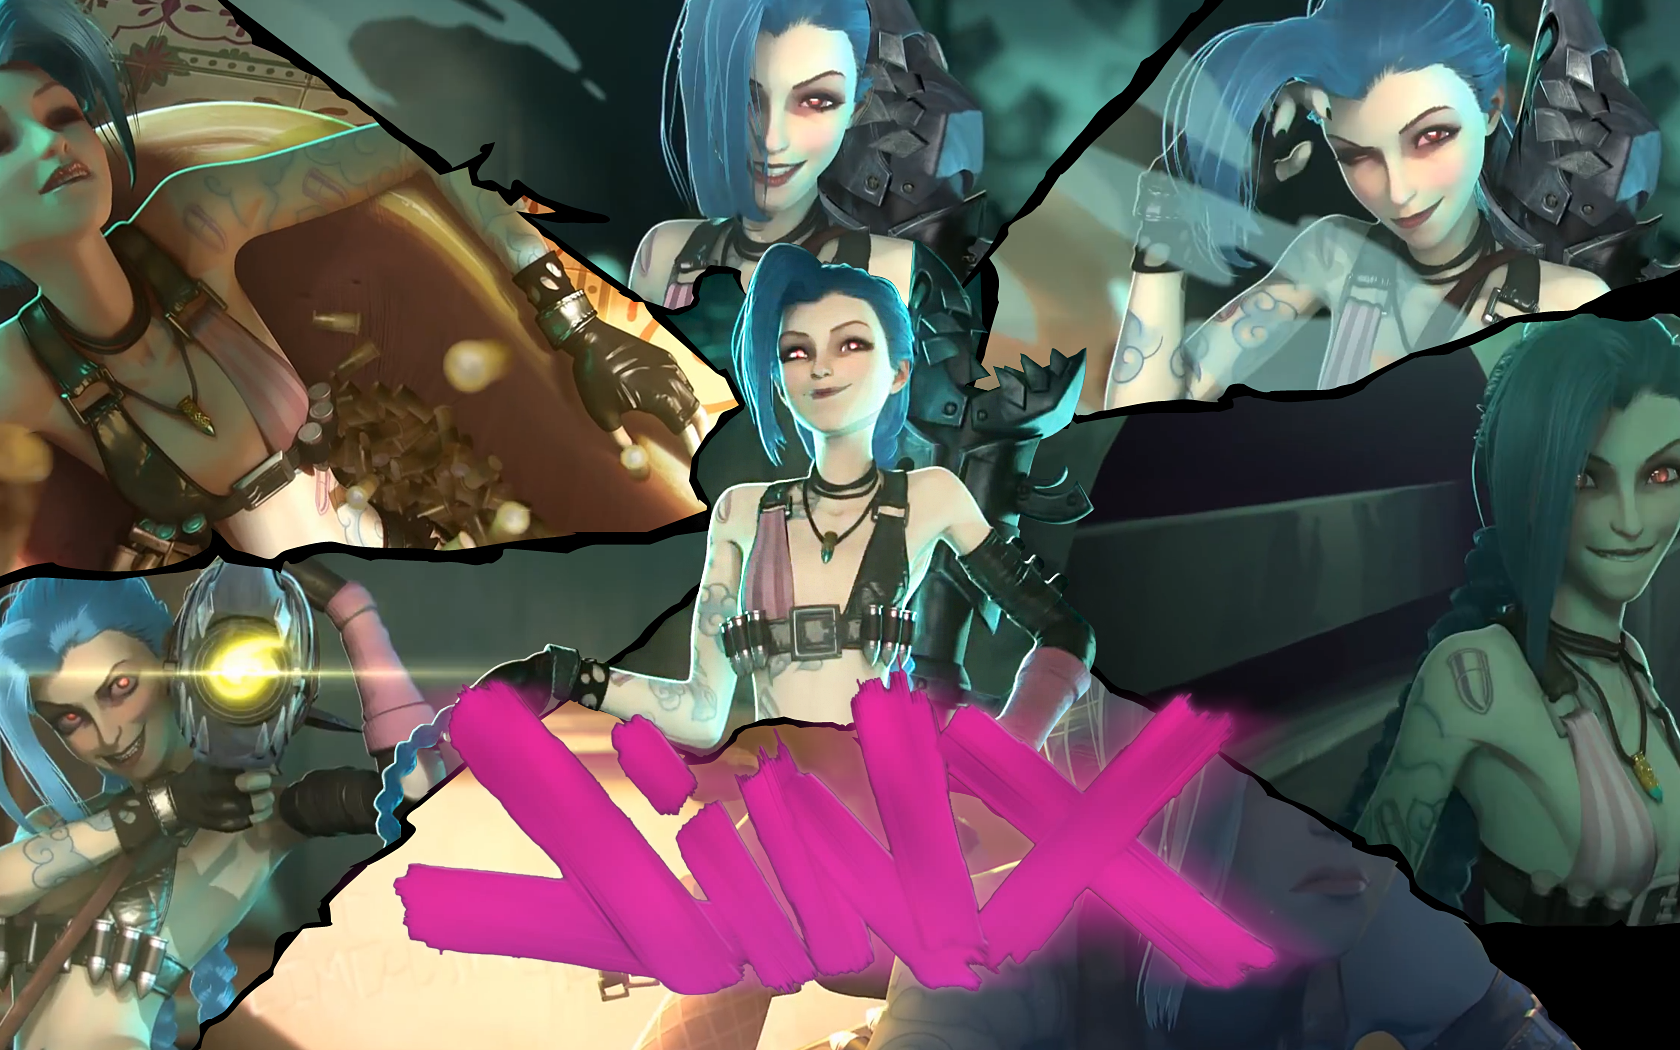 General 1680x1050 Jinx (League of Legends) League of Legends video games collage PC gaming video game girls video game characters